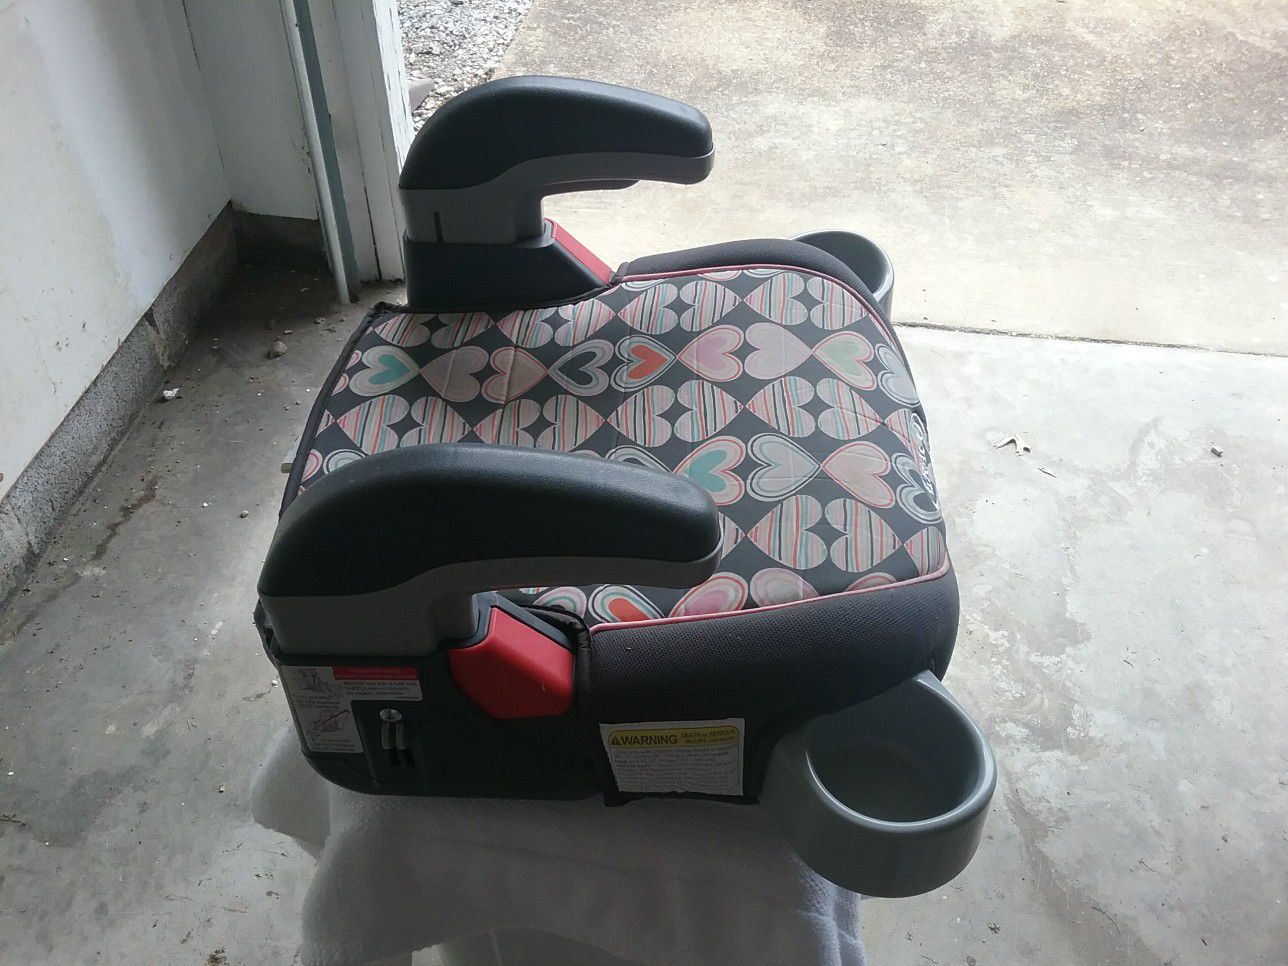 Toddlers booster car seat.